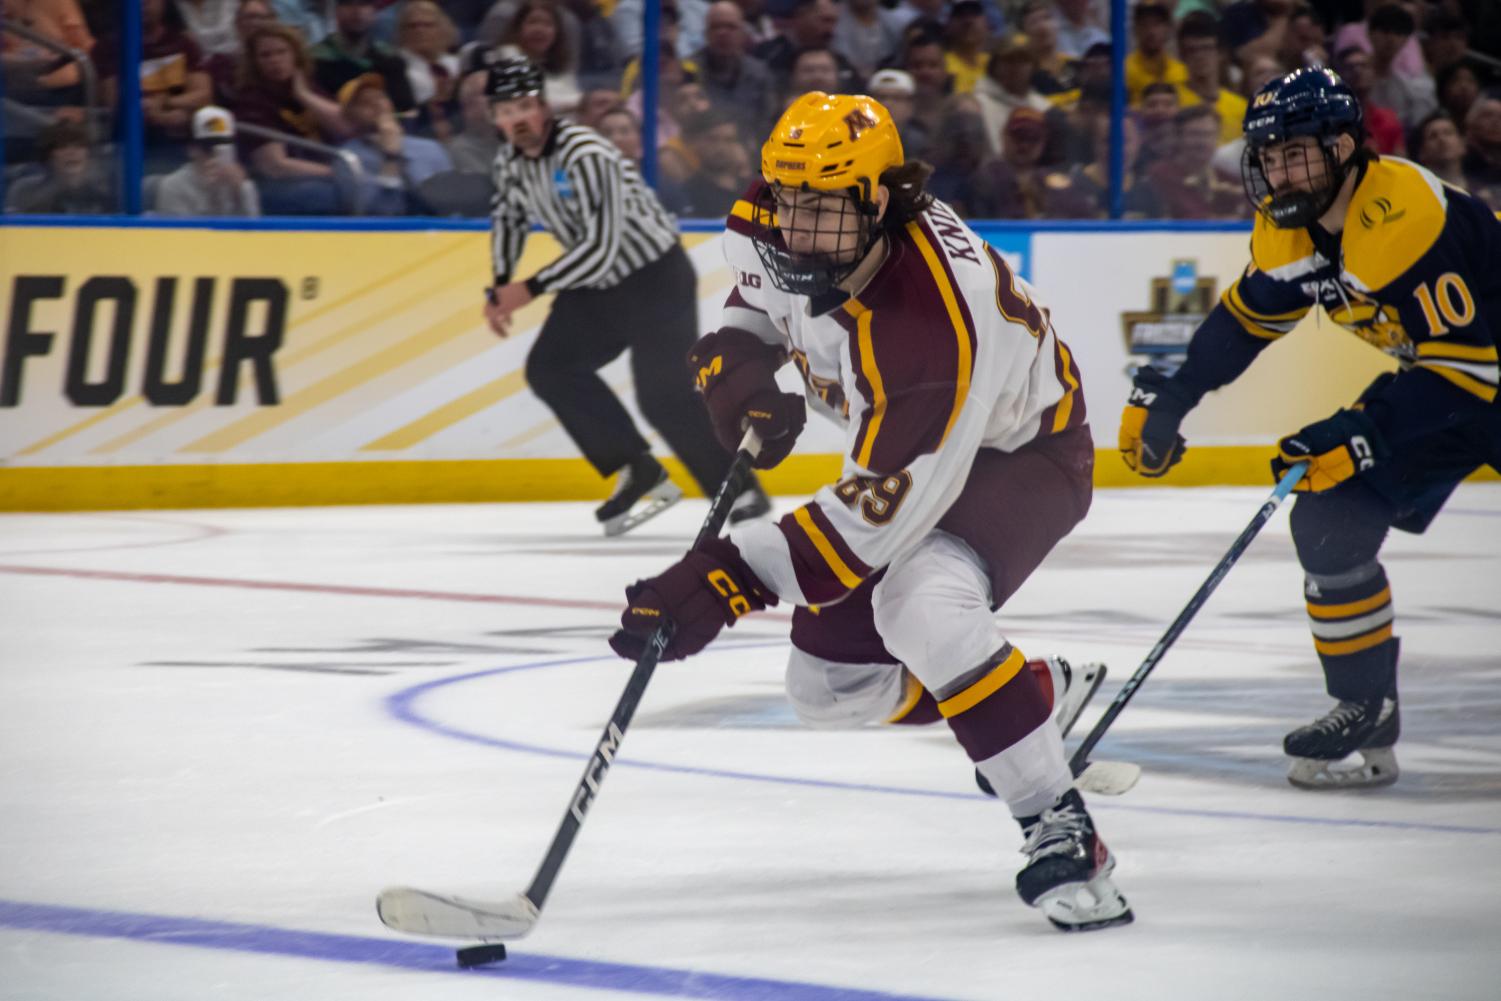 A crazy day': Gophers defenseman Brock Faber traded to Wild in